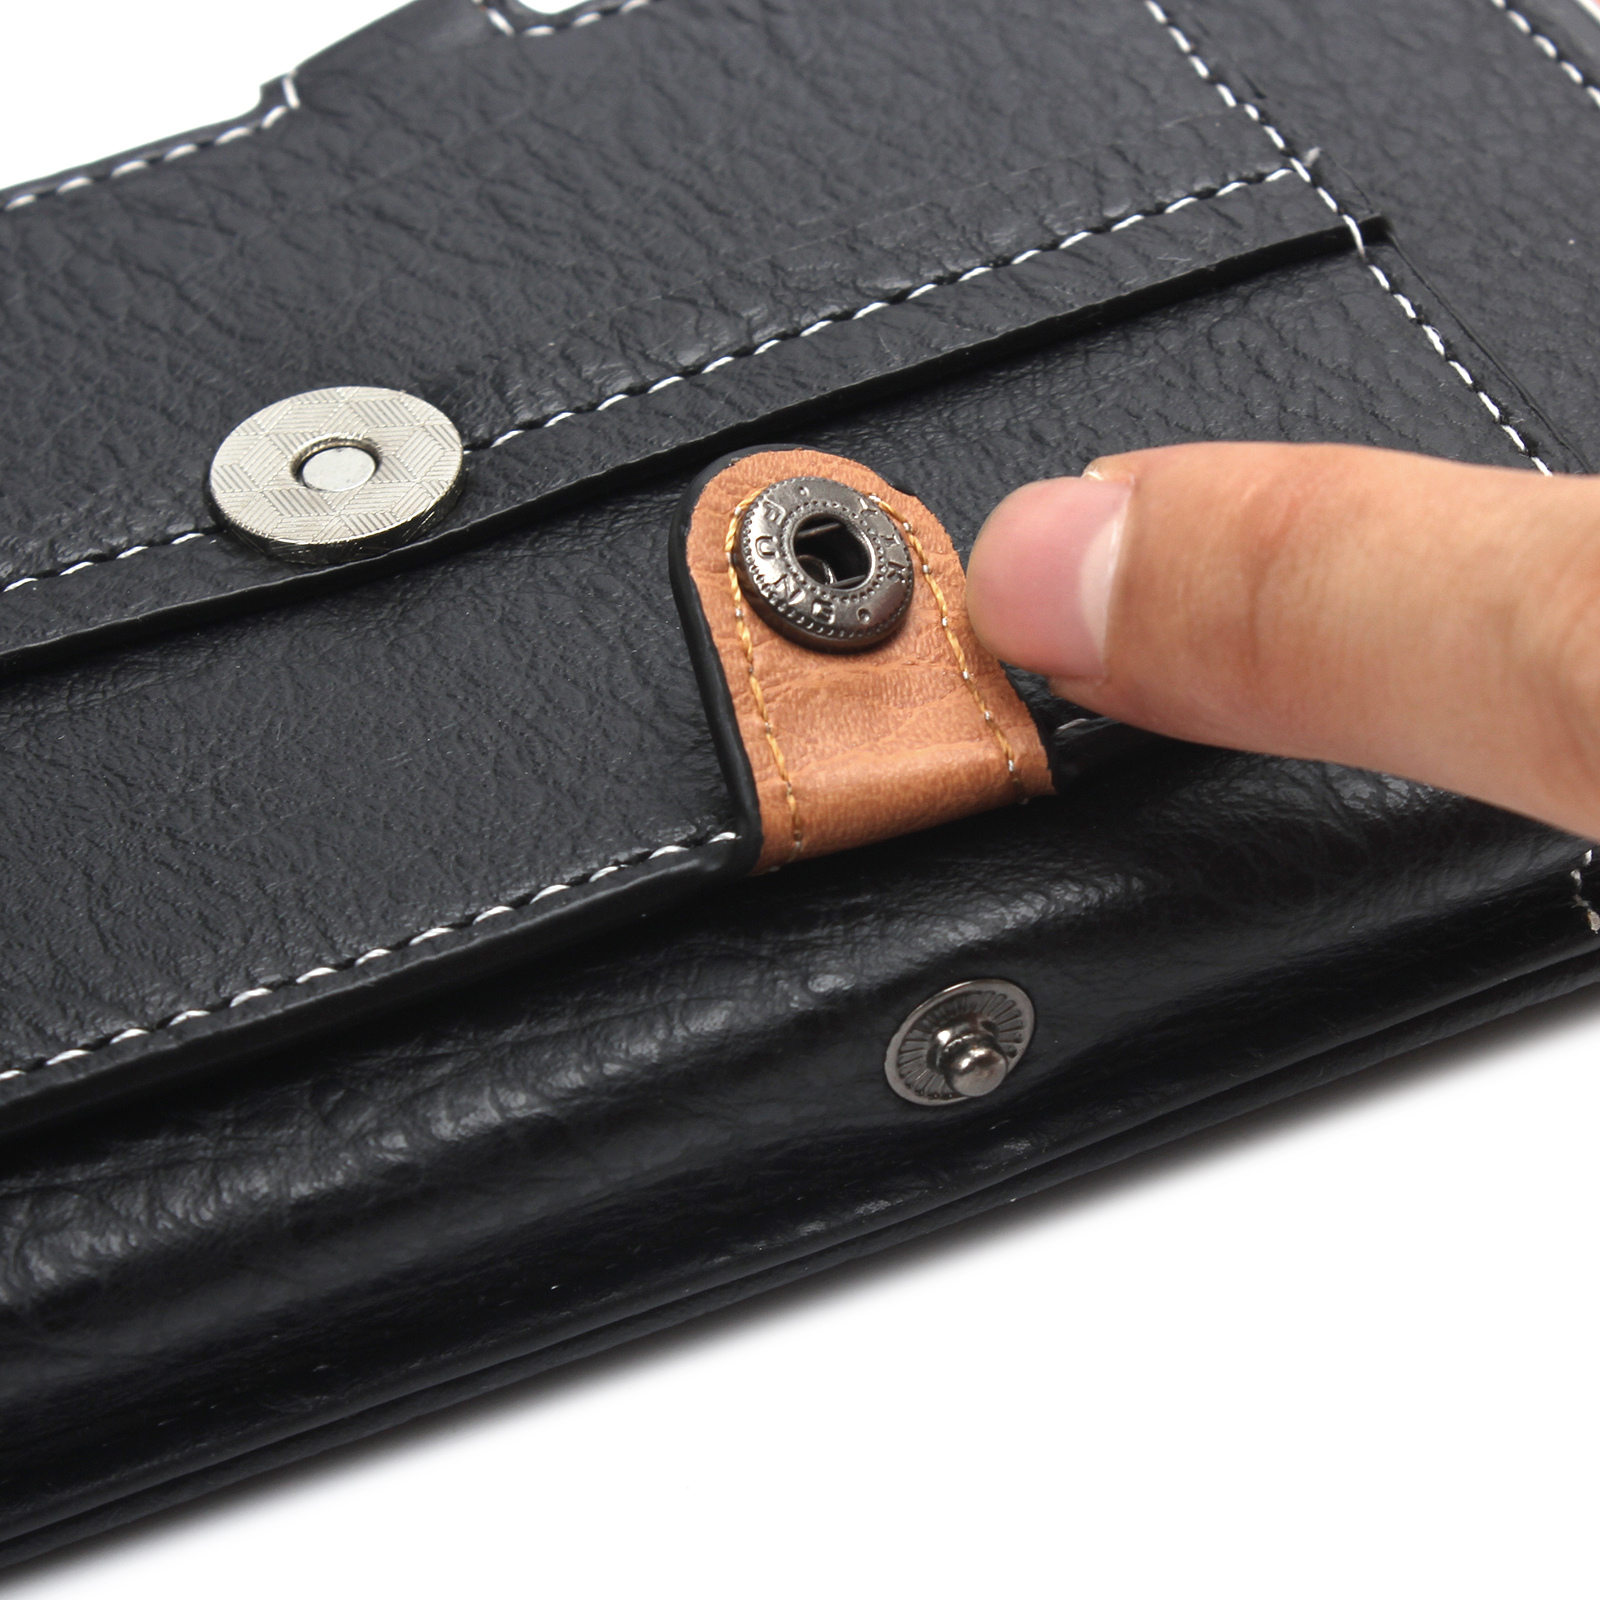 Bakeey-Casual-Vintage-Bussiness-64-inch-Vertical-Multi-Pocket-Multi-Card-Slot-PU-Leather-Mobile-Phon-1692765-6